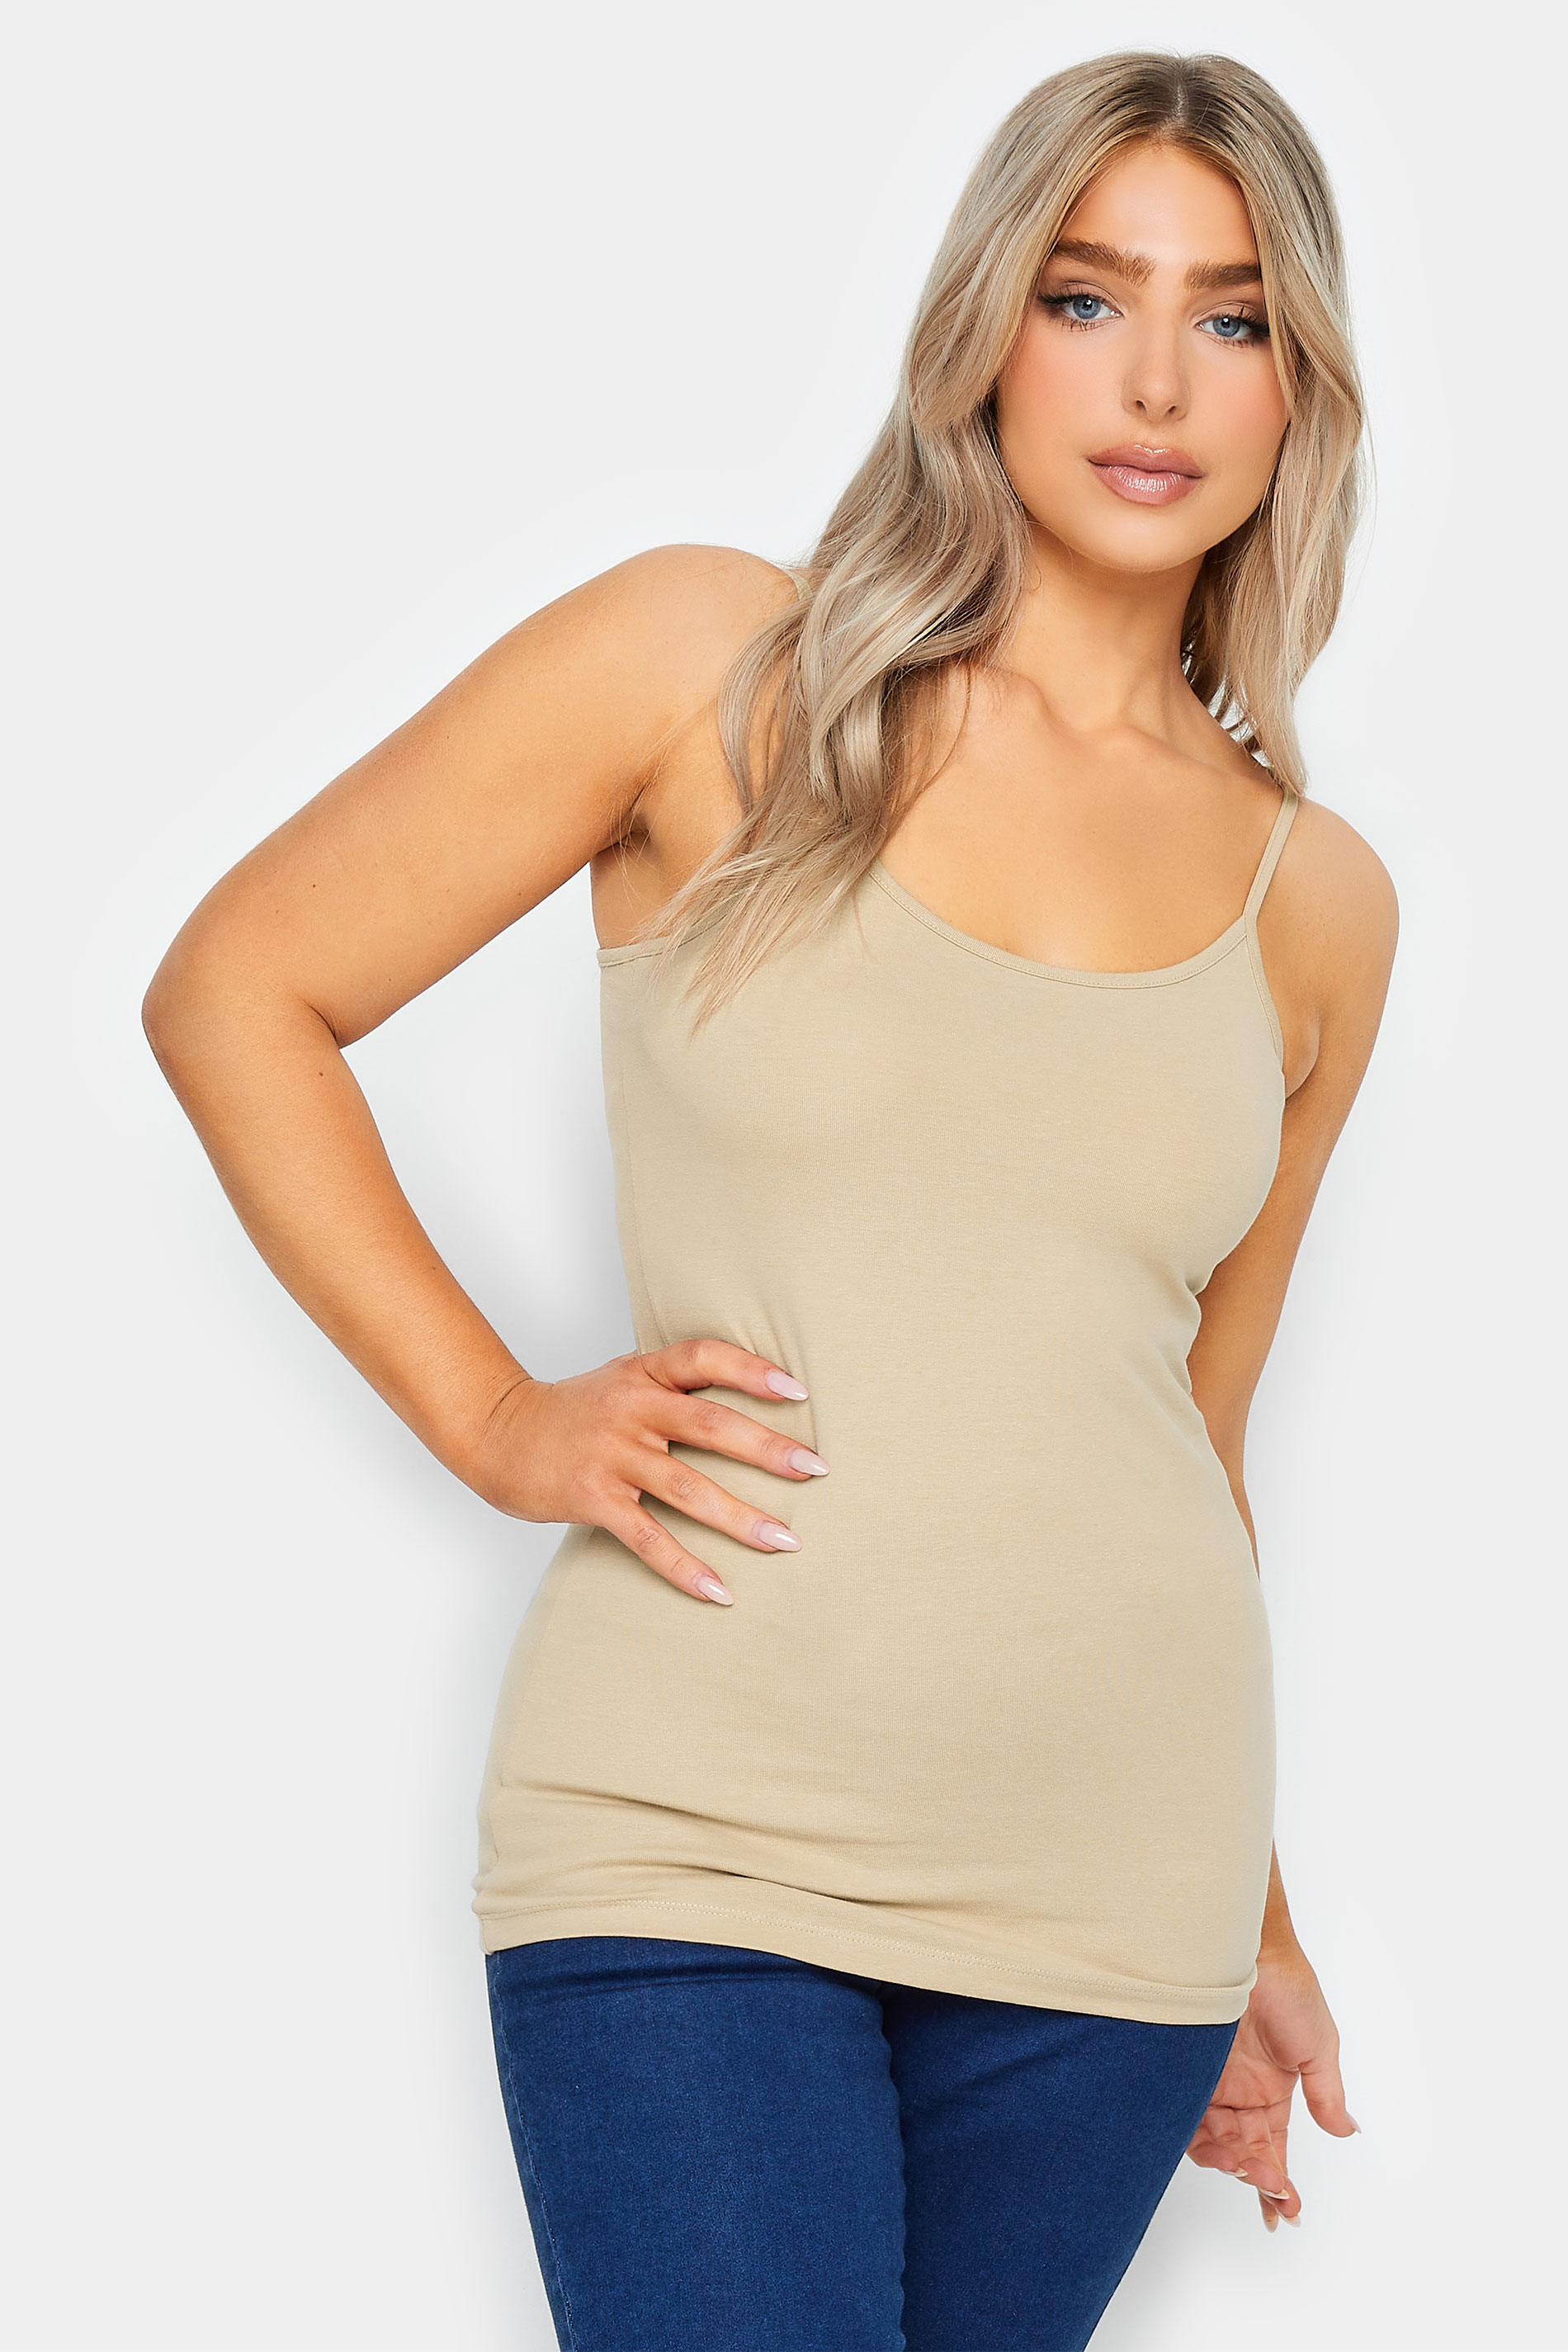 M&Co 3 PACK Beige Brown & White Cami Vest Tops | M&Co 2